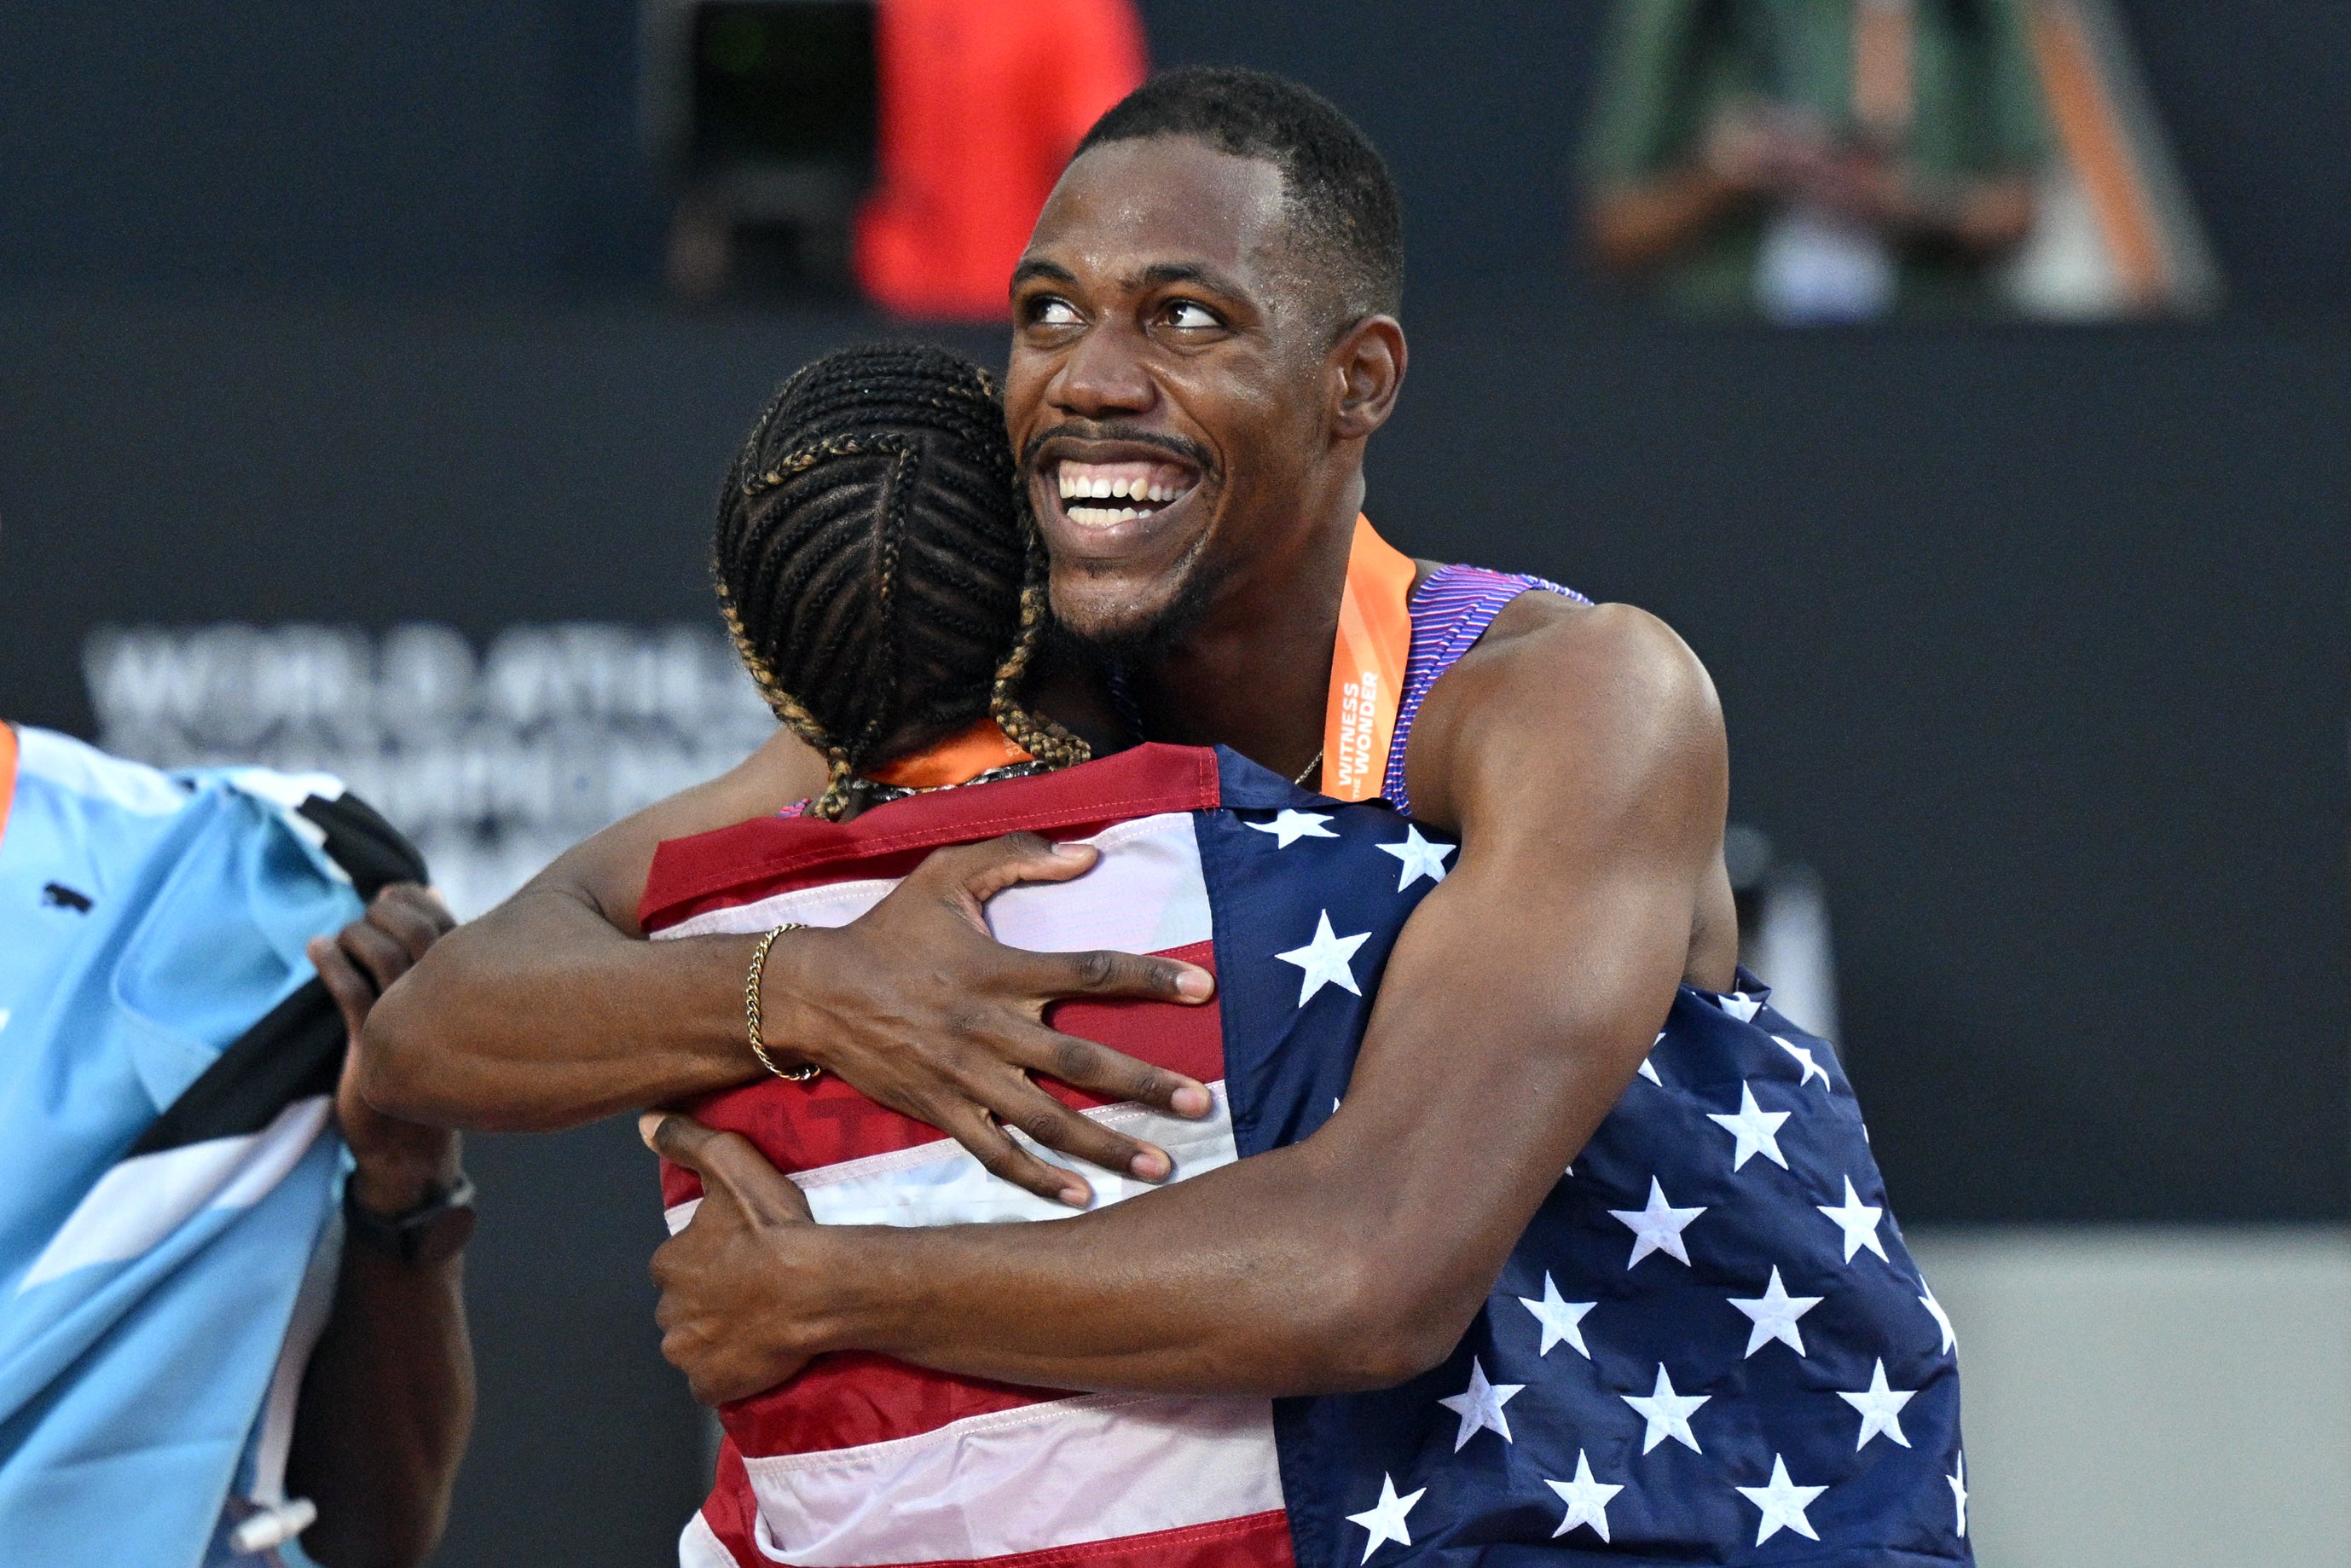 Gold medalist Noah Lyles of Team United States and bronze medalist Zharnel Hughes of Team Great Britain